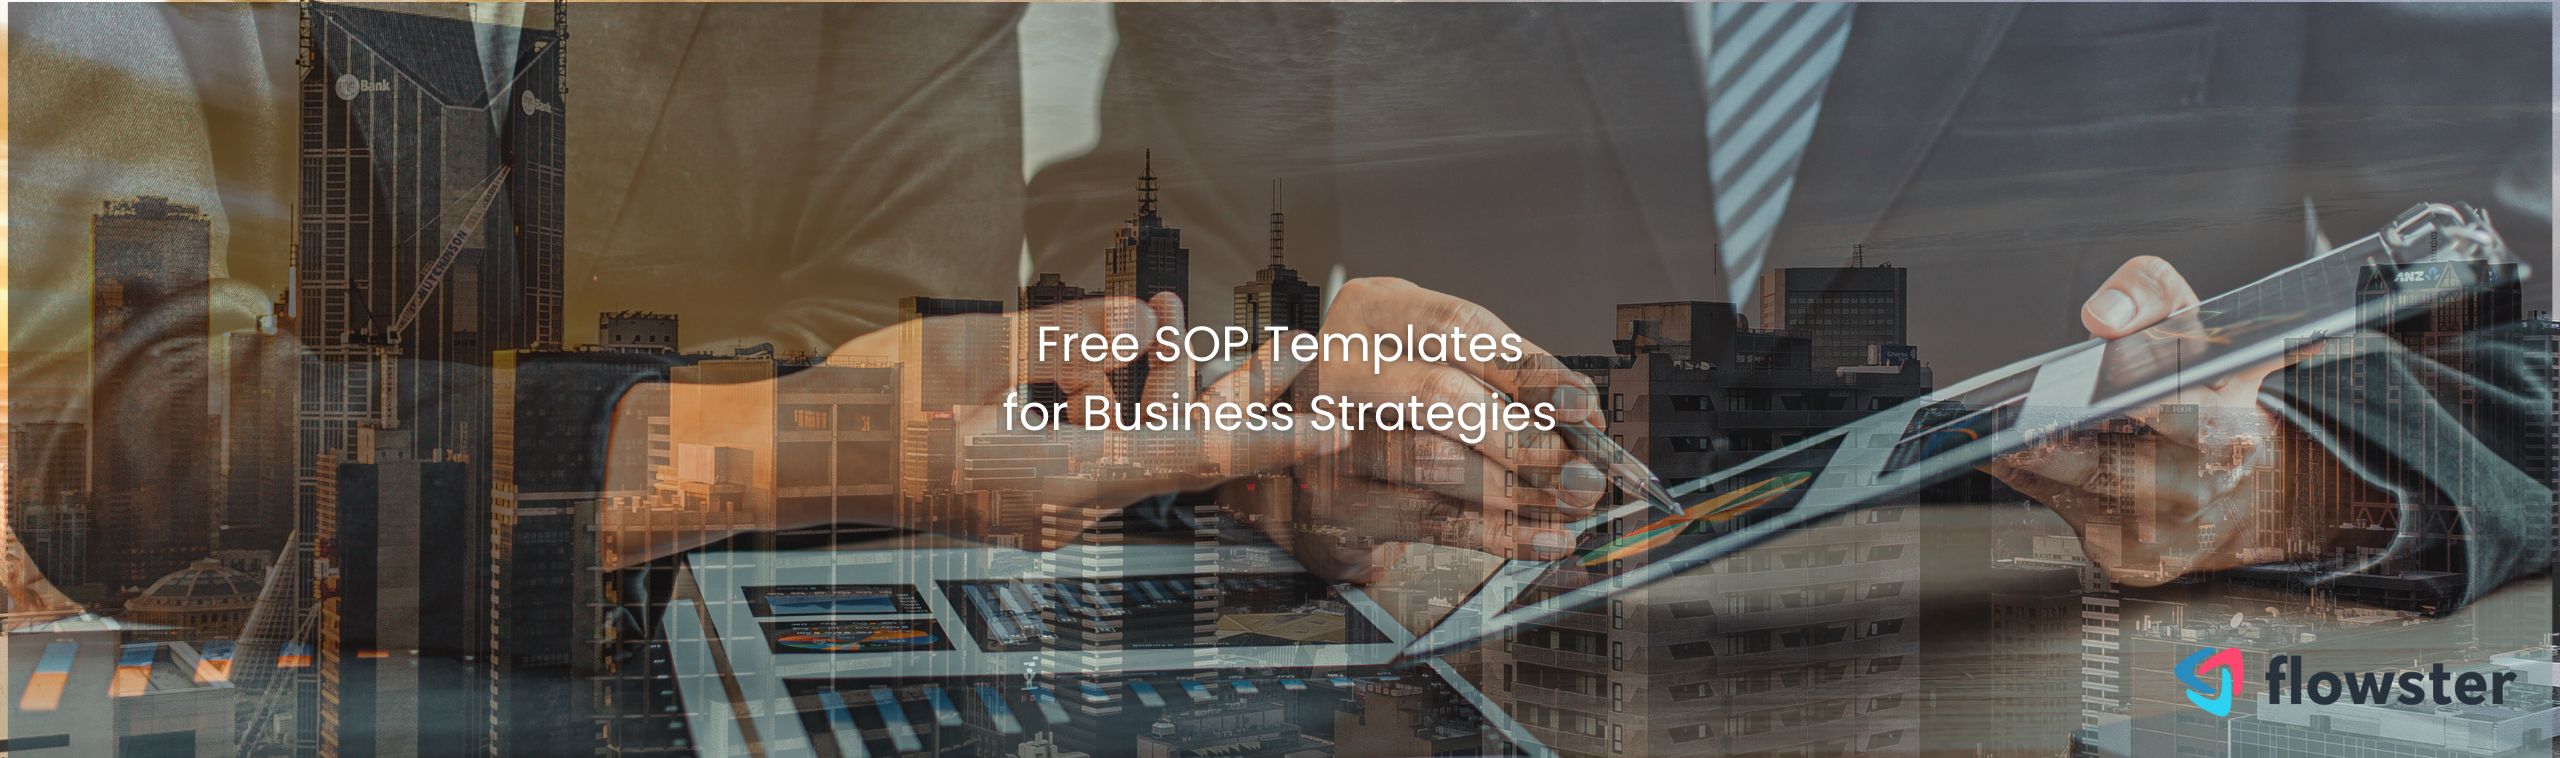 Free SOP Templates for Business Strategies to Help You Grow Your Business